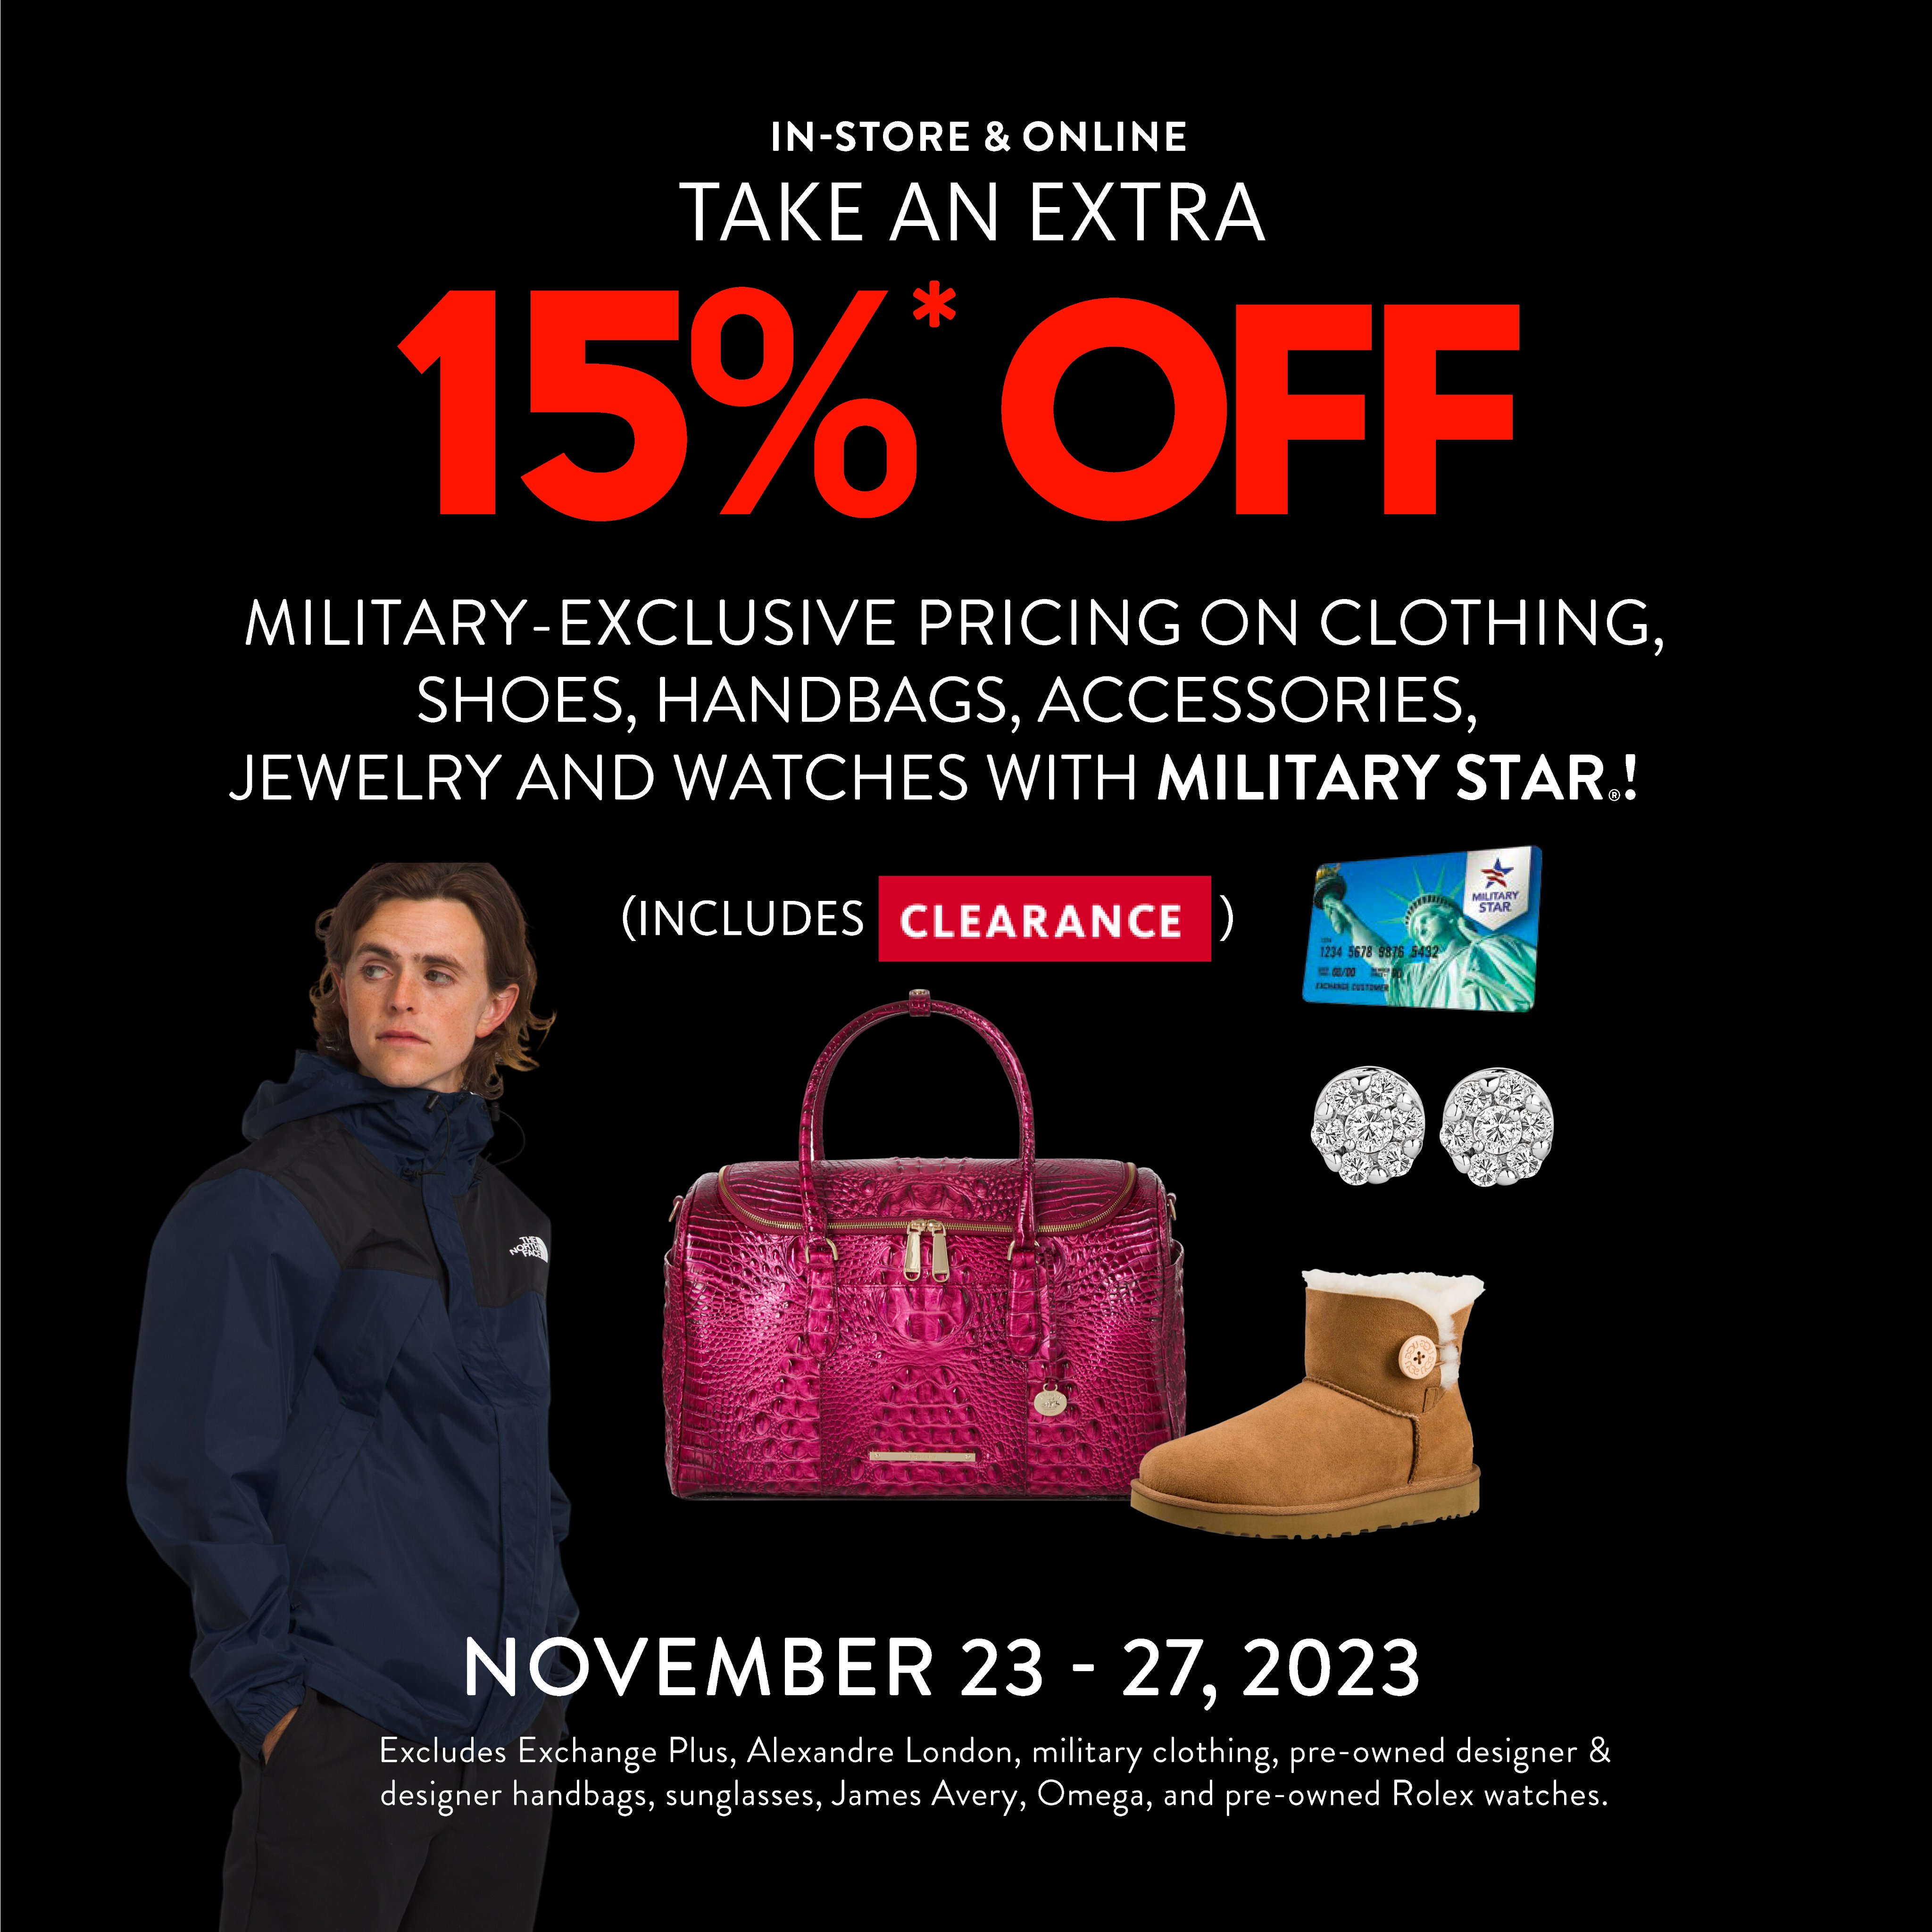 The Exchange on X: Find Black Friday deals and clearance with an extra 15%  off military-exclusive pricing on clothing, shoes, handbags, accessories,  jewelry and watches when you use MILITARY STAR.   Details